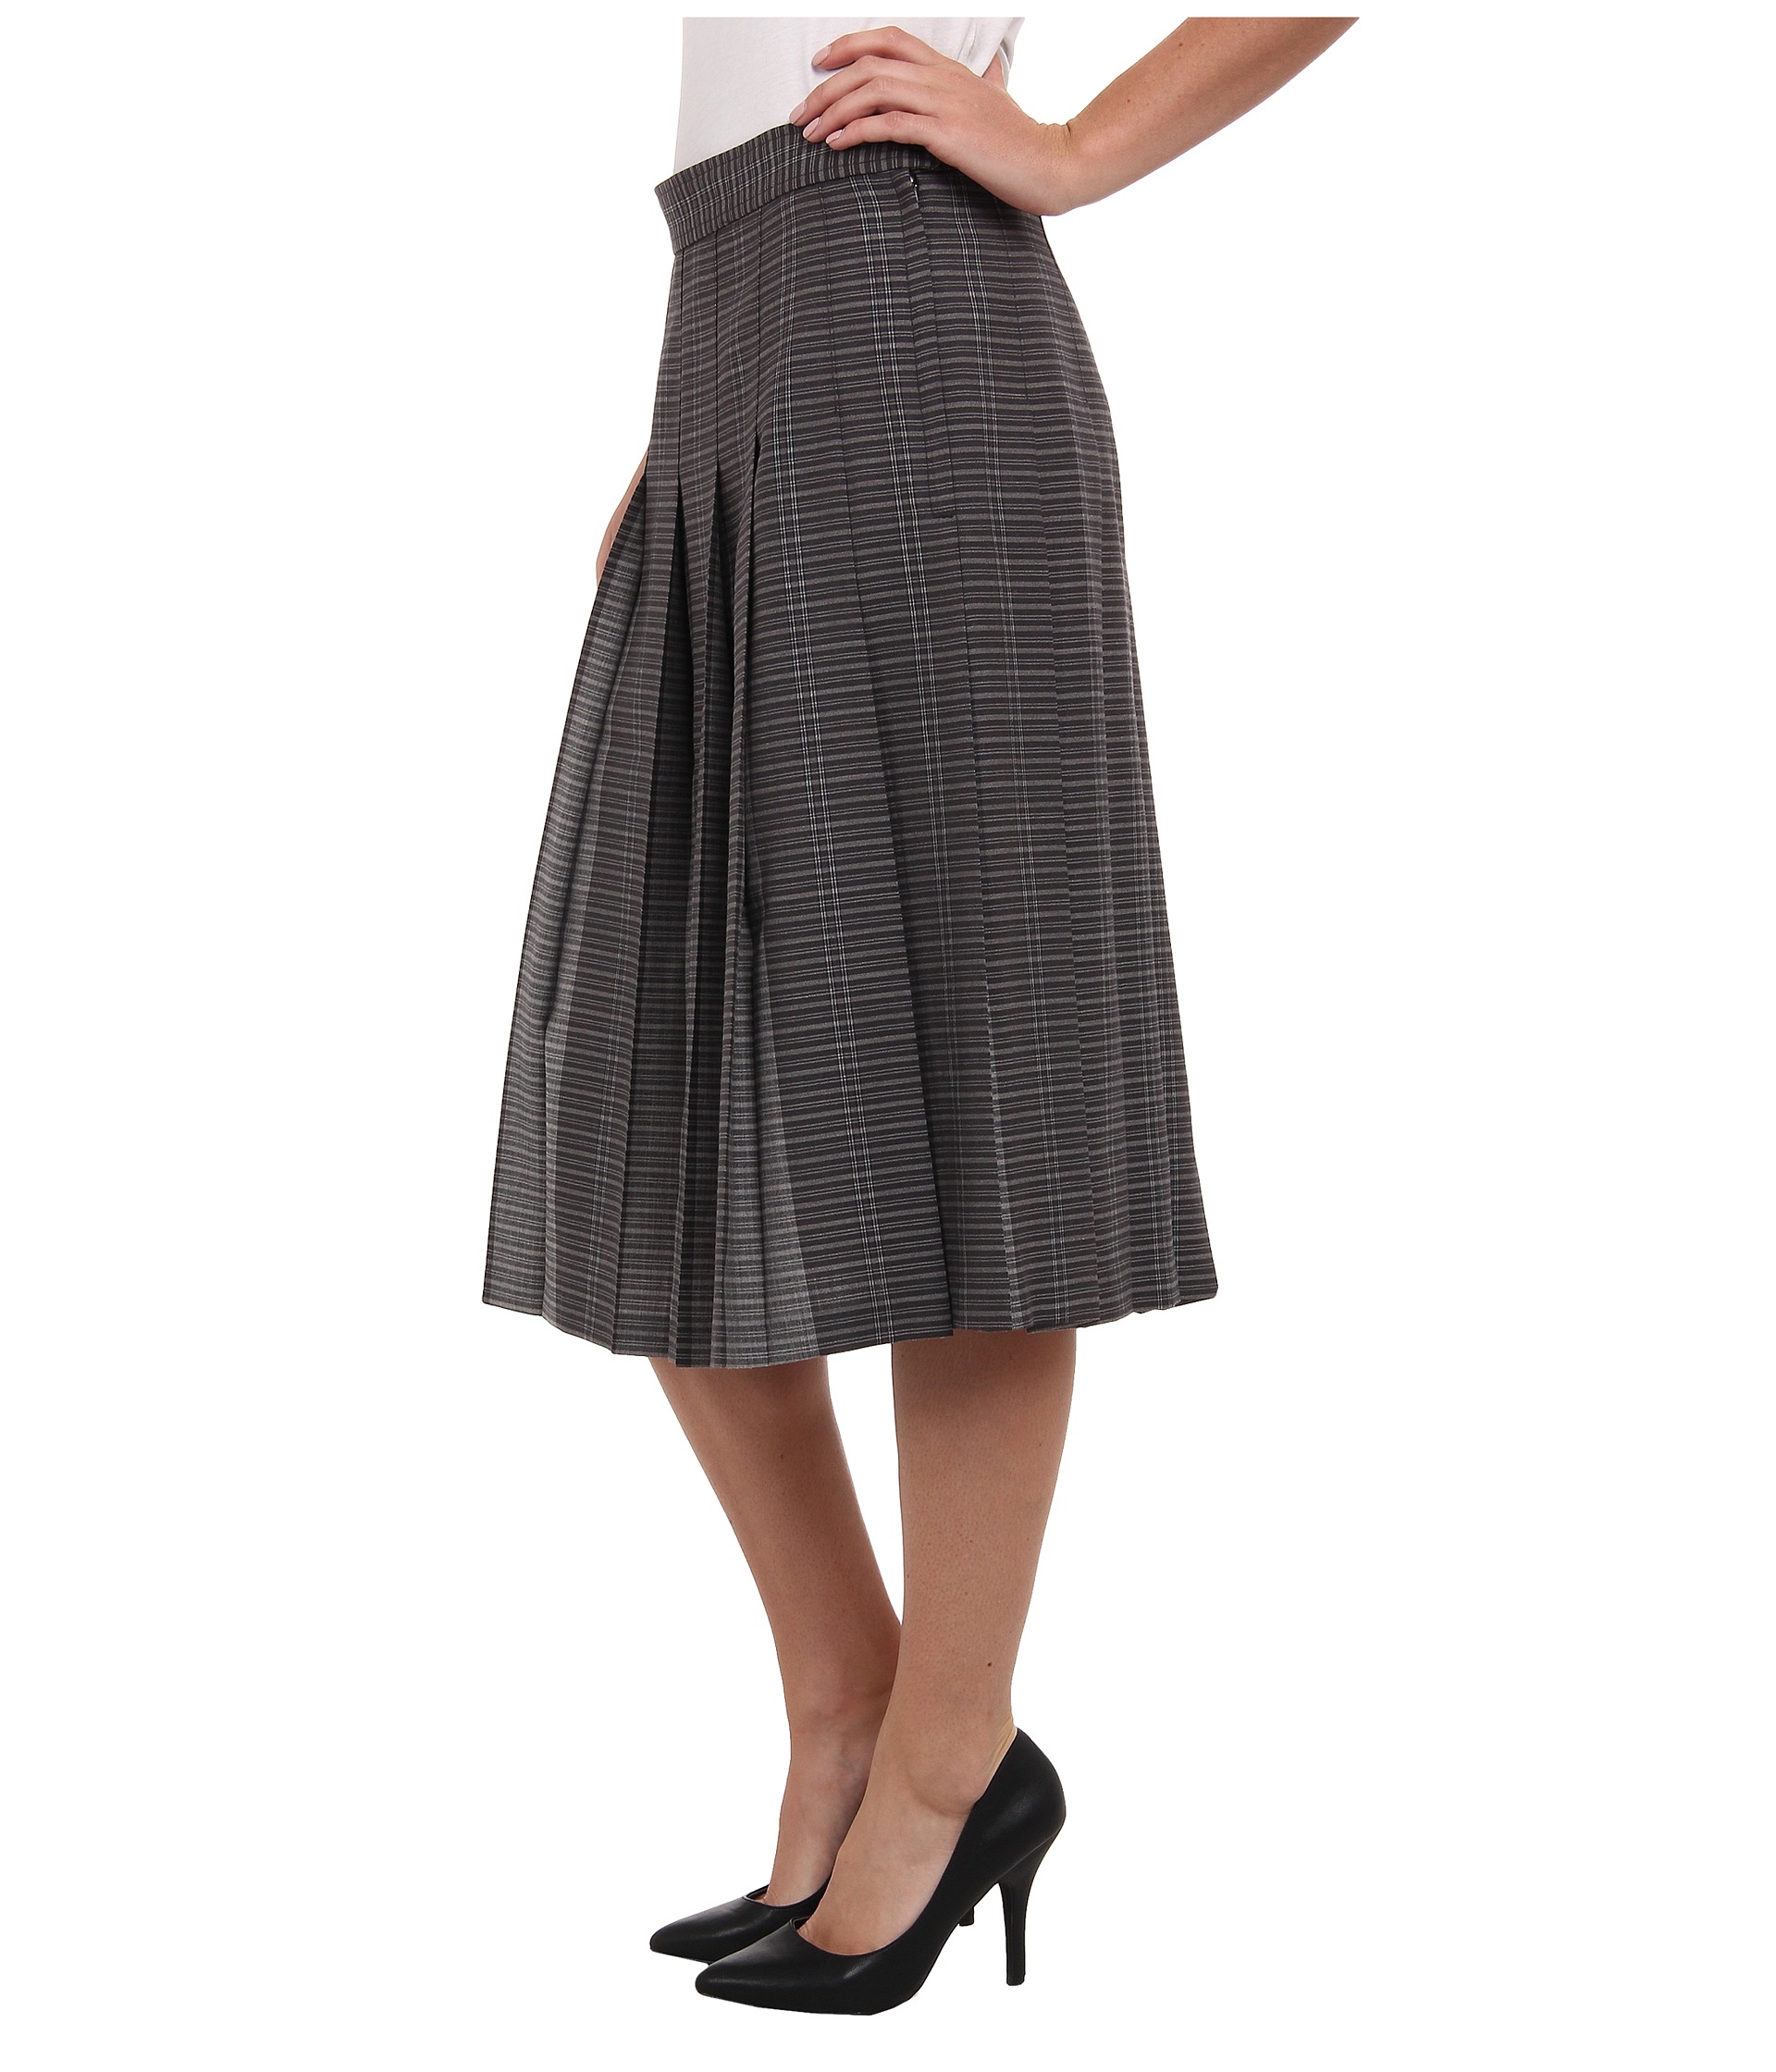 Pendleton Perfect Pleat Skirt, Clothing | Shipped Free at Zappos